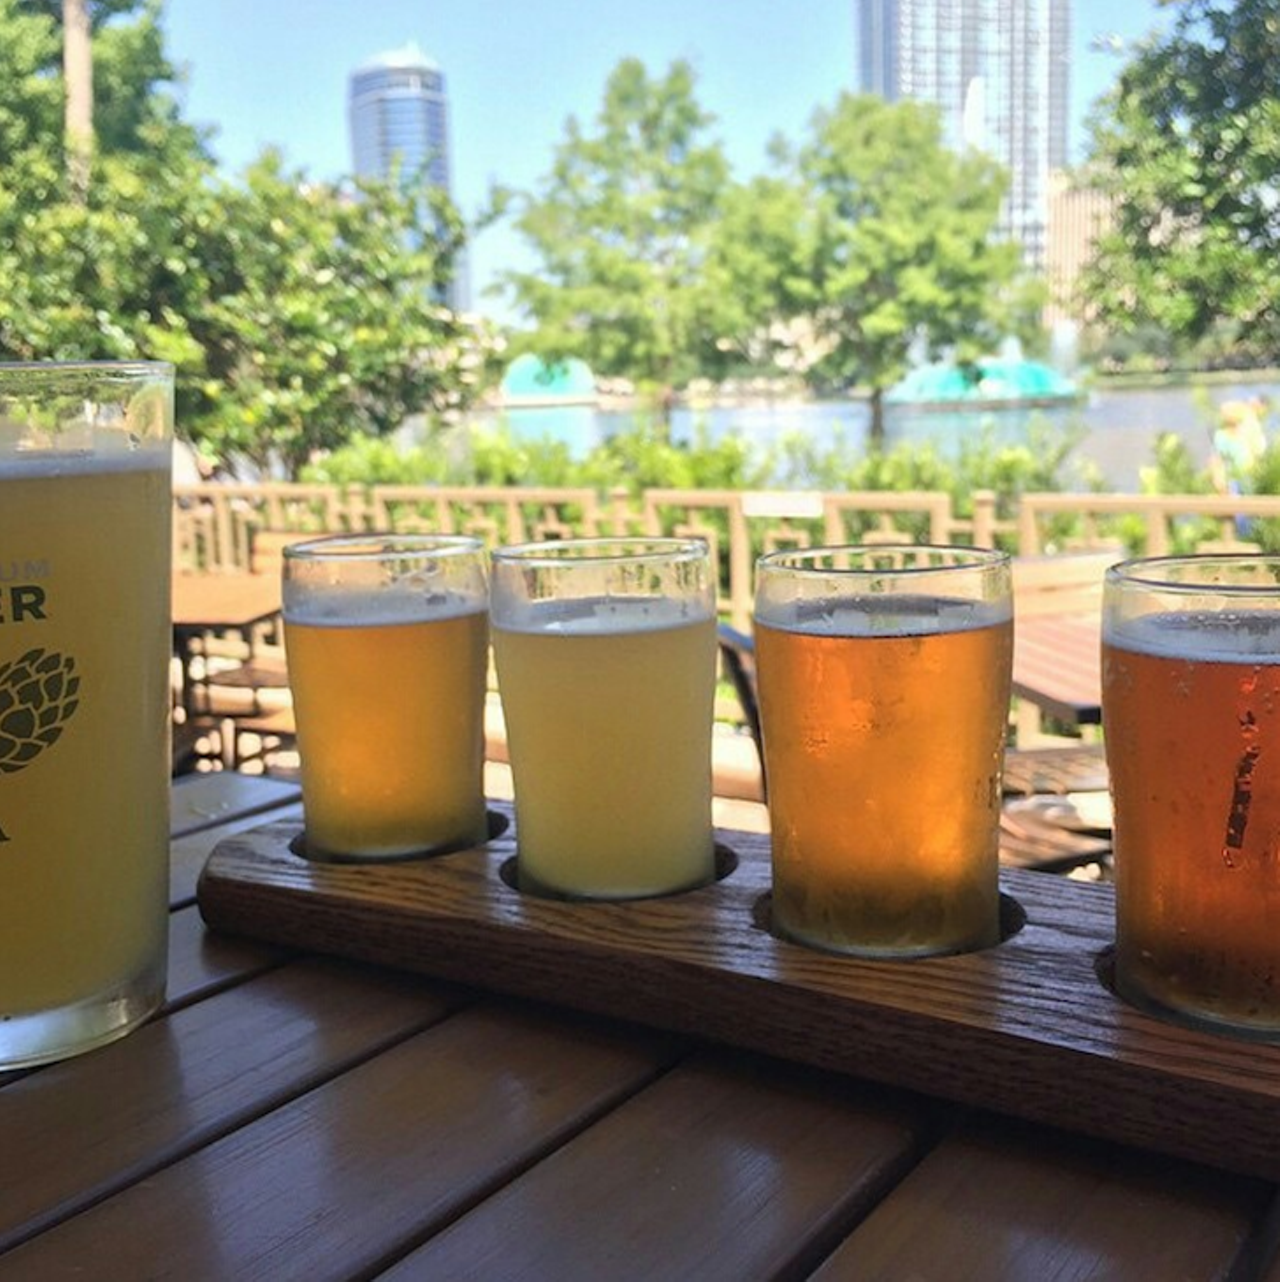 World of Beer
Multiple Locations 
You're not going to find a better view of Lake Eola and beer pairing. This craft beer chain has multiple friendly and laid-back locations in Orlando, but the downtown spot is truly awesome. Stop in for happy hour Monday through Friday 3 p.m. to 7 p.m. and Saturday and Sundays from 10 p.m. to close for $5 tavern shares and $4 drafts. 
Photo via lakeeola/ Instagram